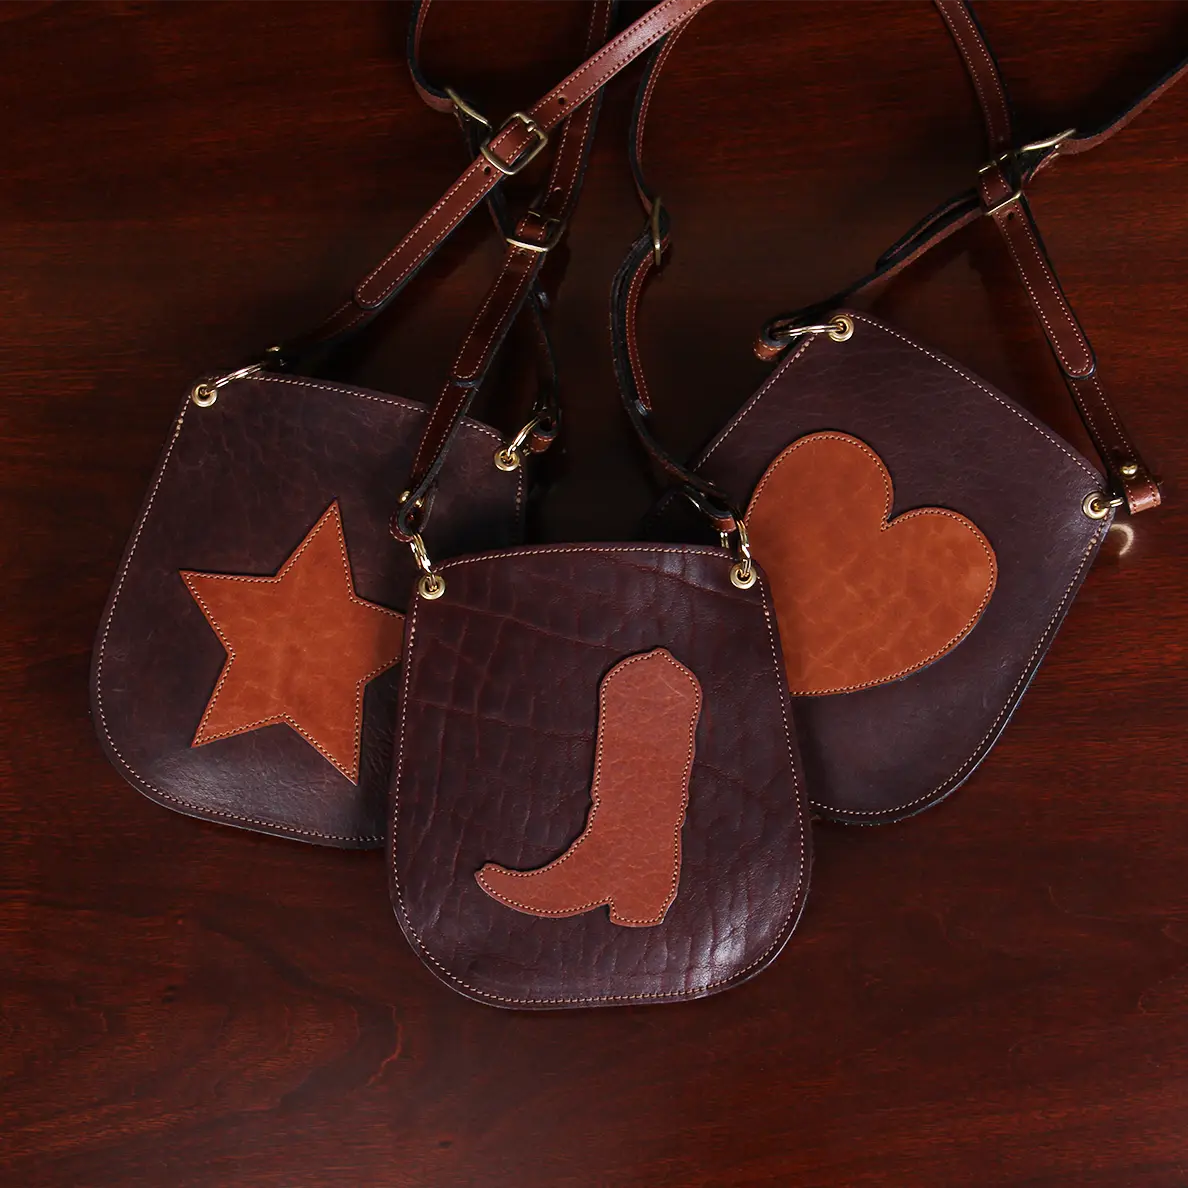 Bella bags in Tobacco Brown American Buffalo with leather patches on front